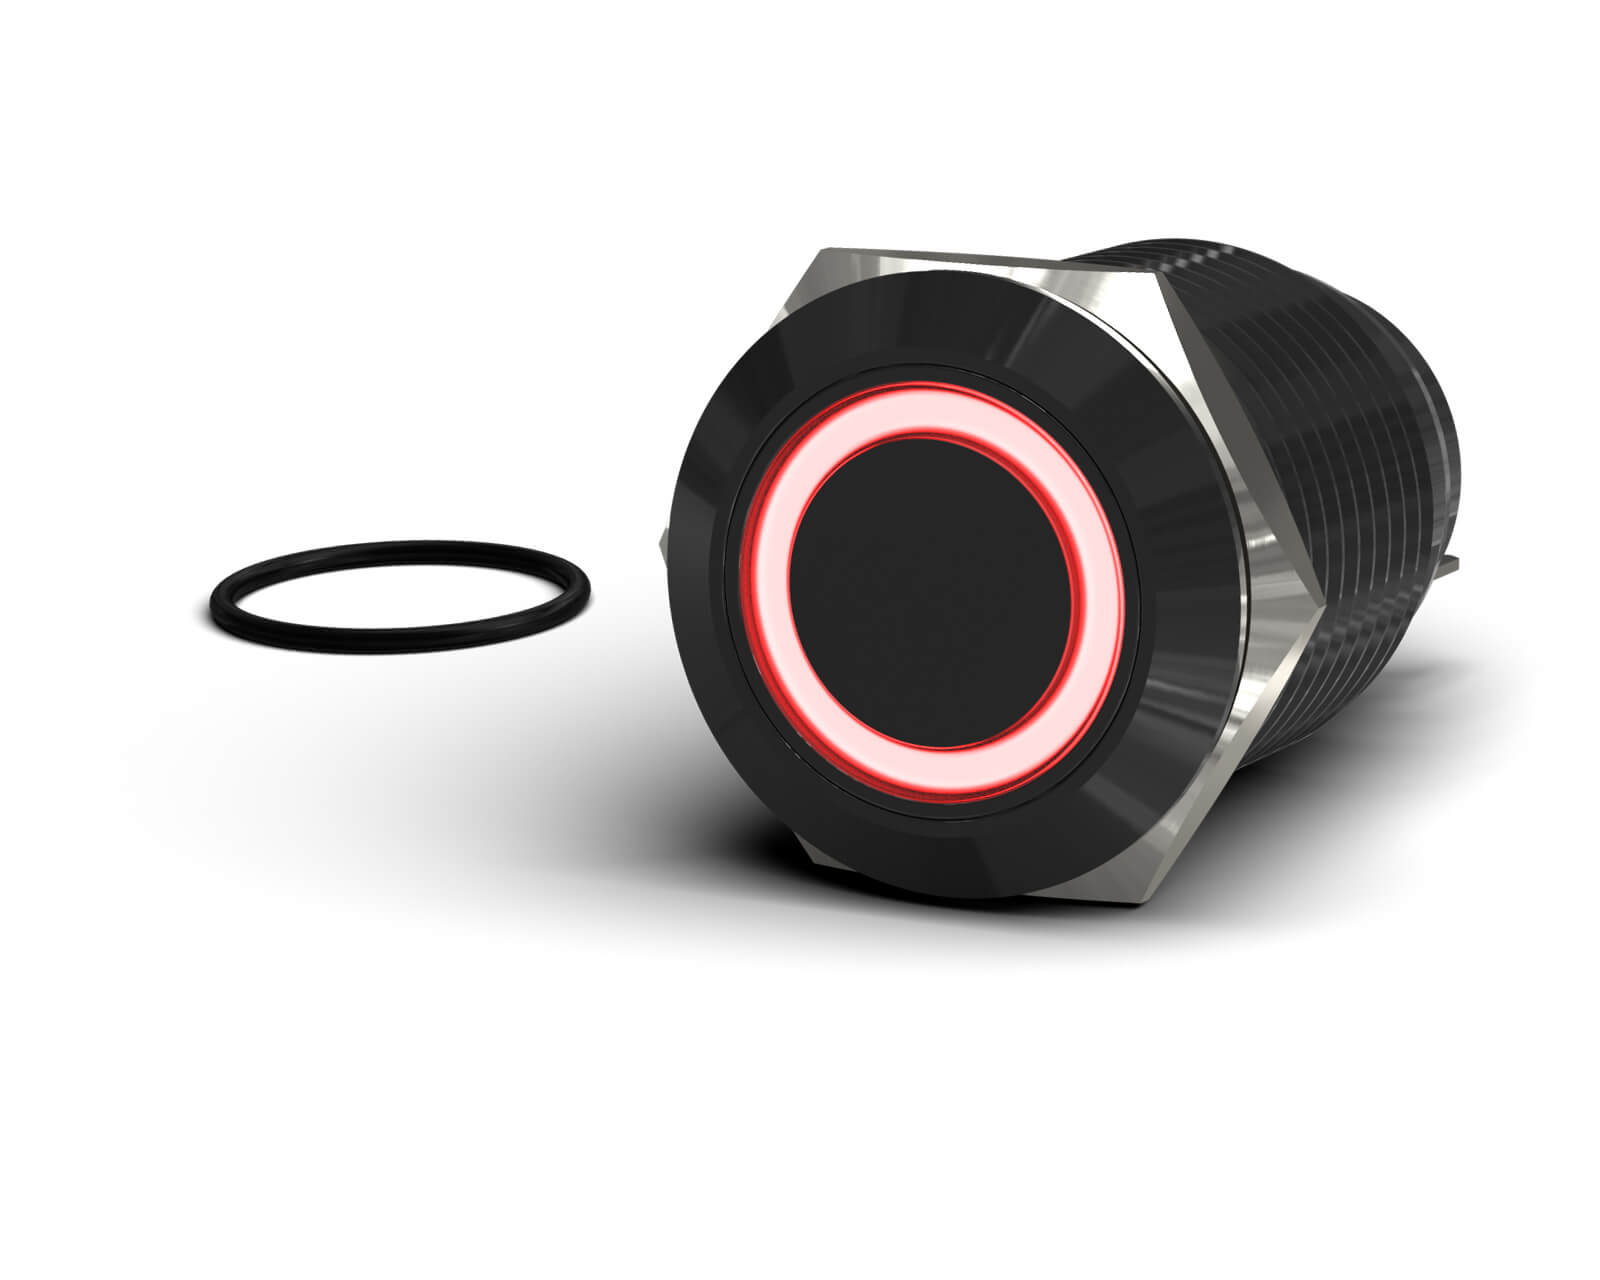 PrimoChill Black Aluminum Momentary Vandal Resistant Switch - 22mm - PrimoChill - KEEPING IT COOL Red LED Ring